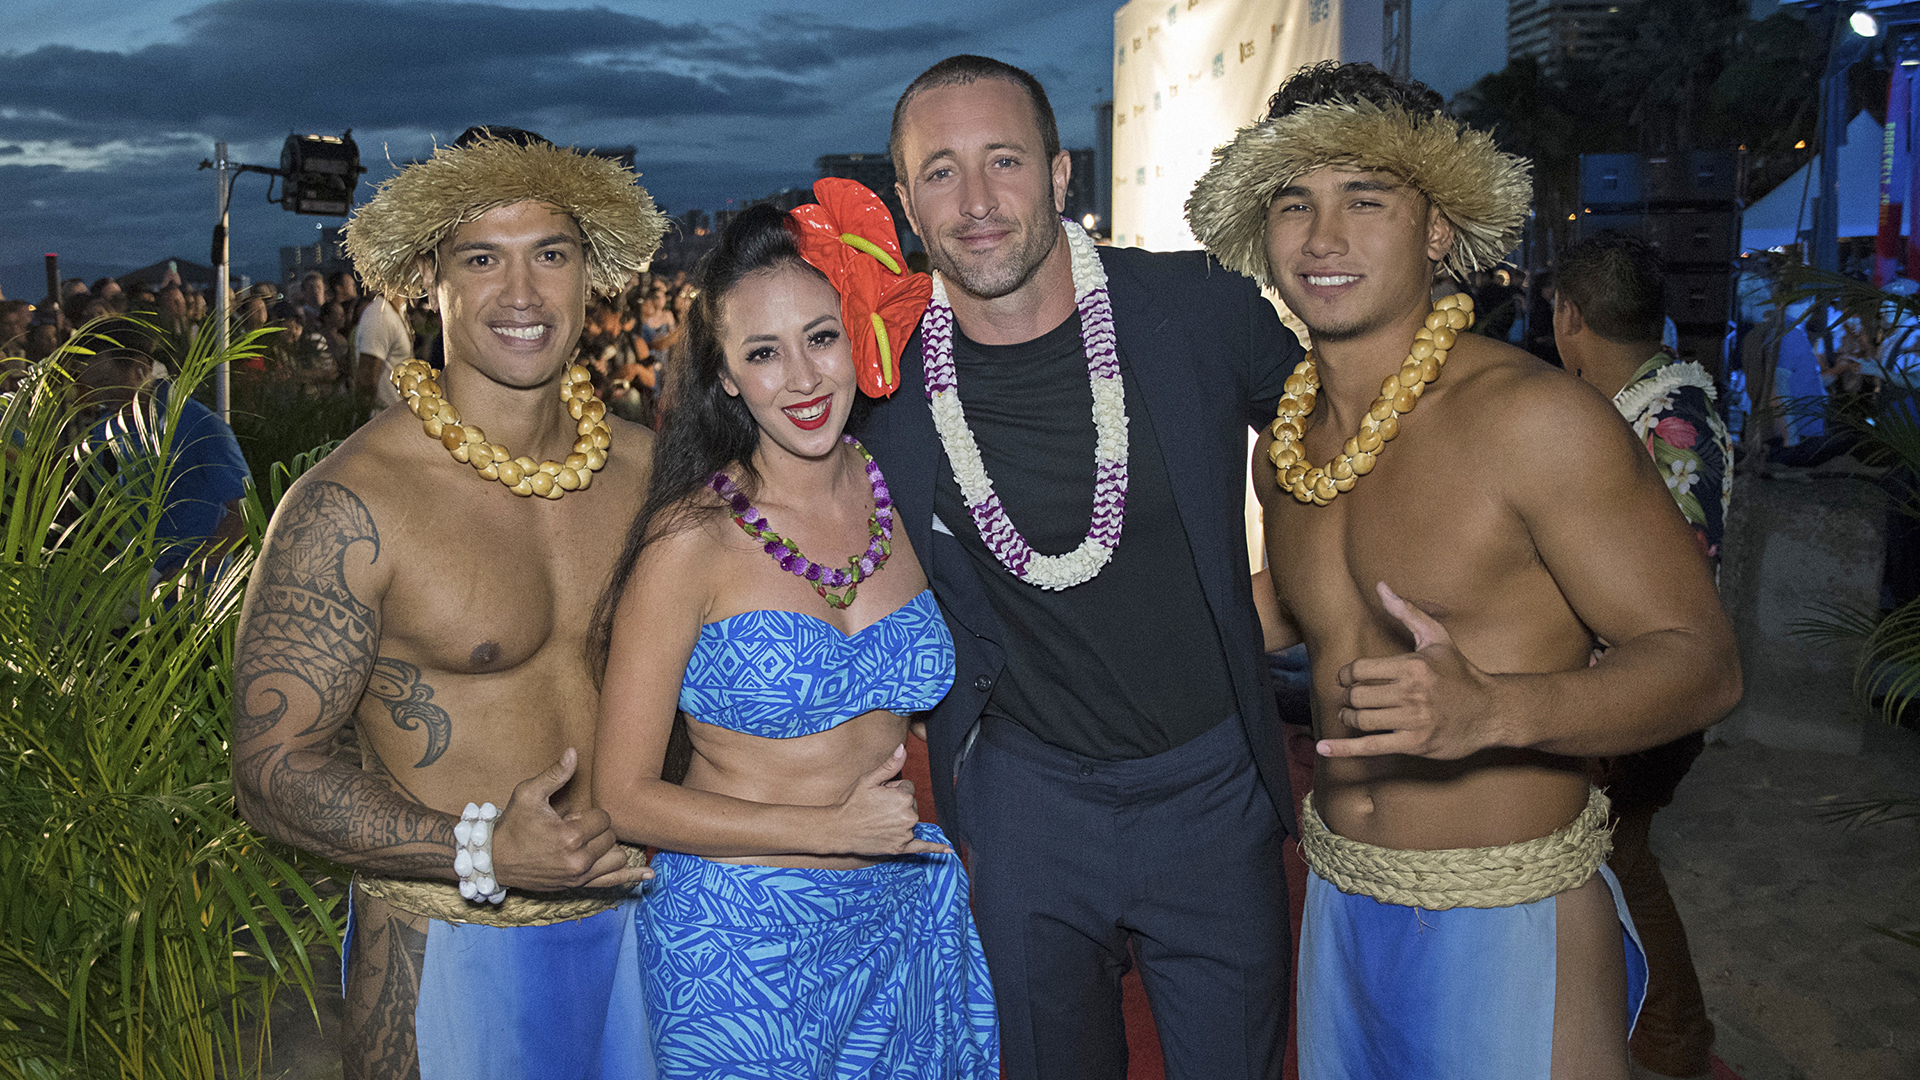 Alex O'Loughlin poses alongside a group dressed up for the festivities.